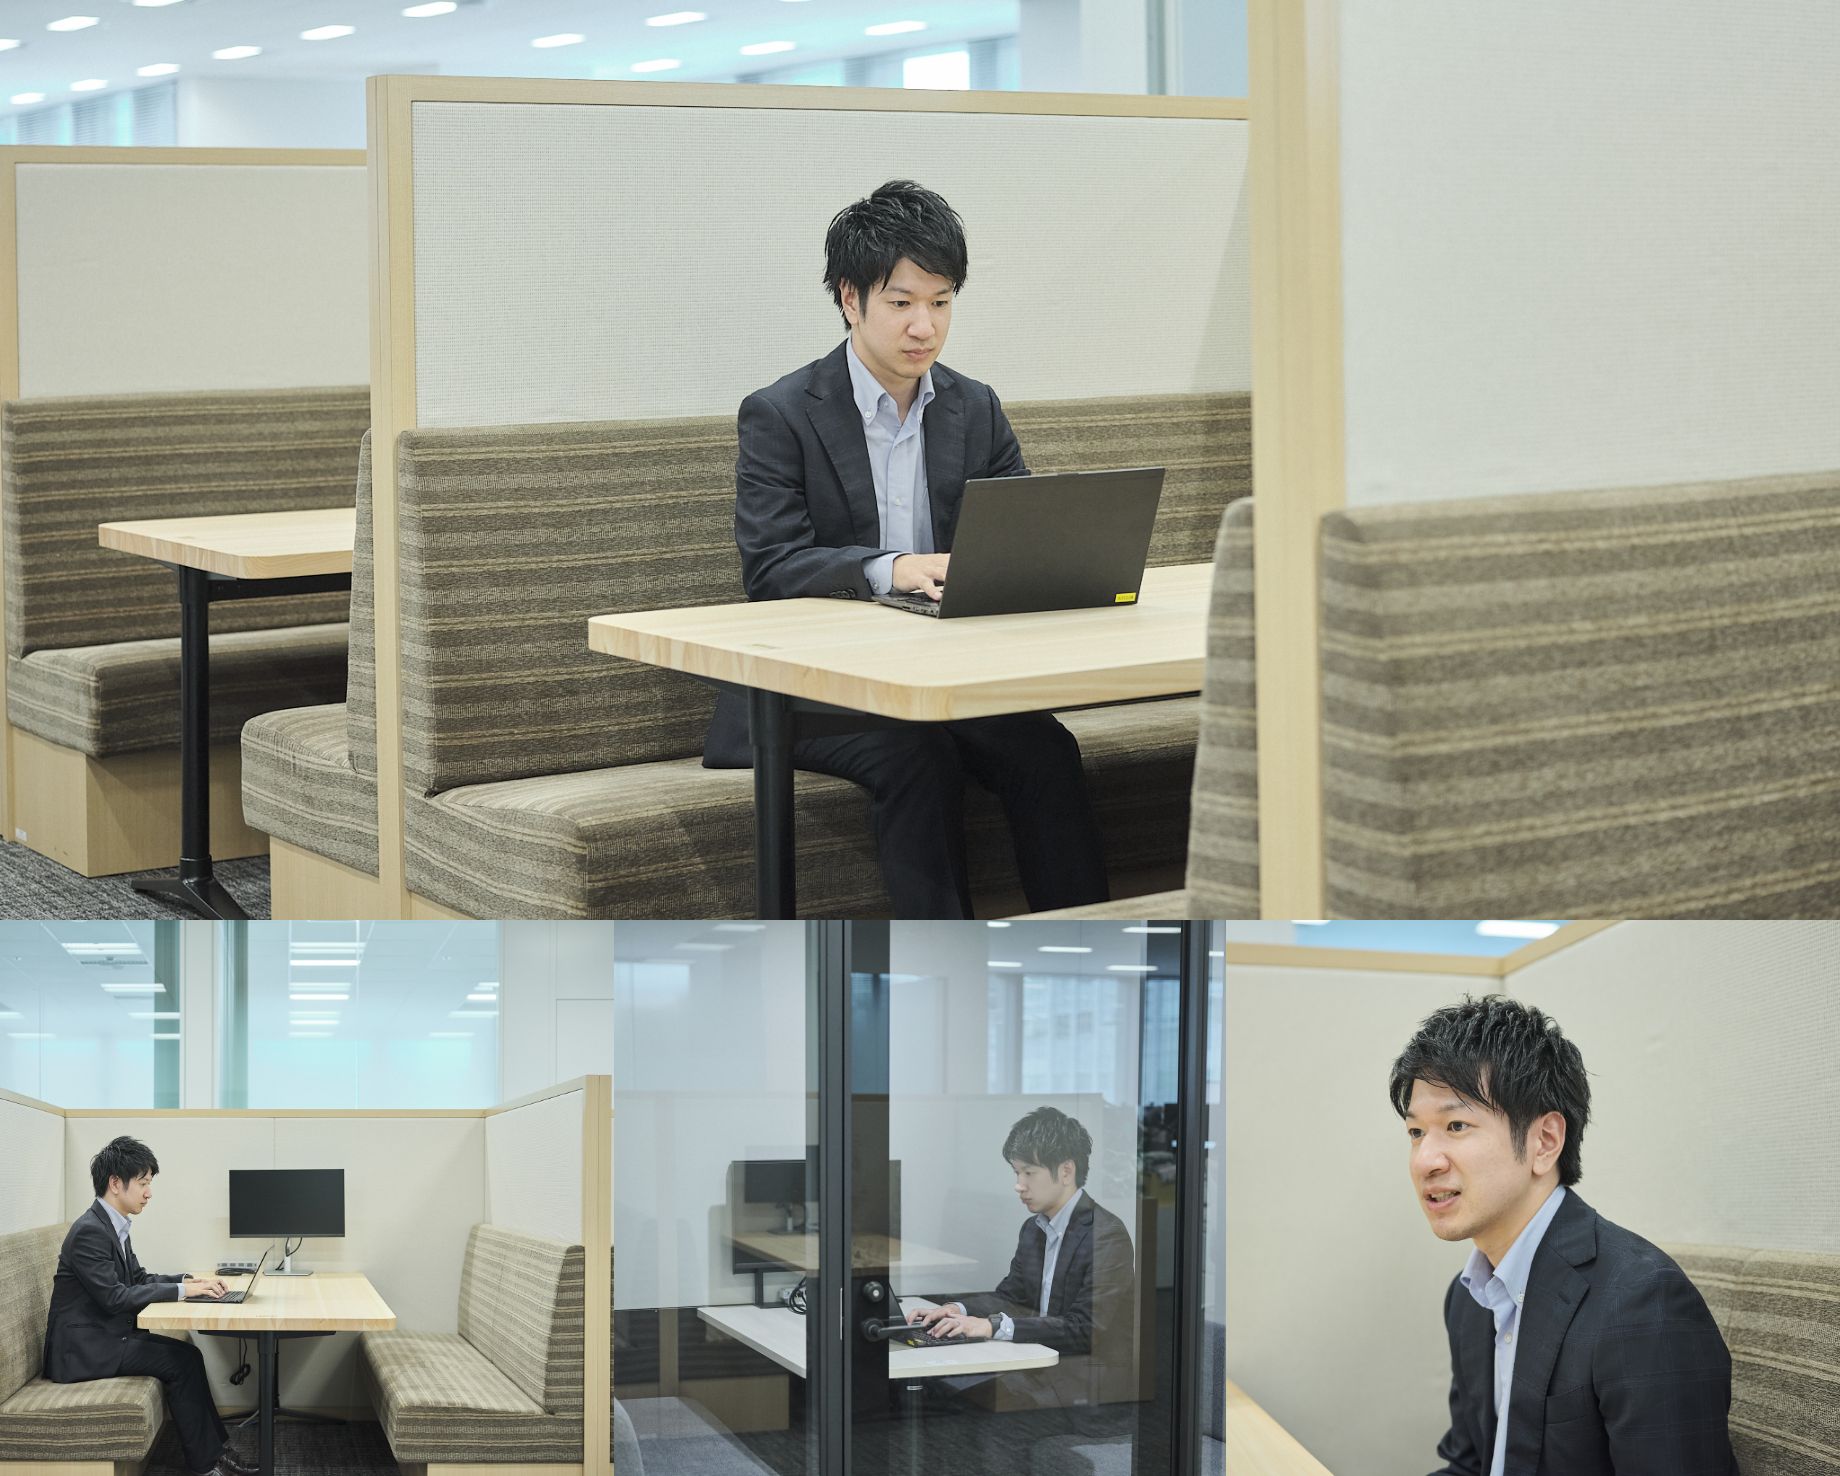 Ohgishi: “The family restaurant-style booth is an open space, so I can work in a relaxed atmosphere.”